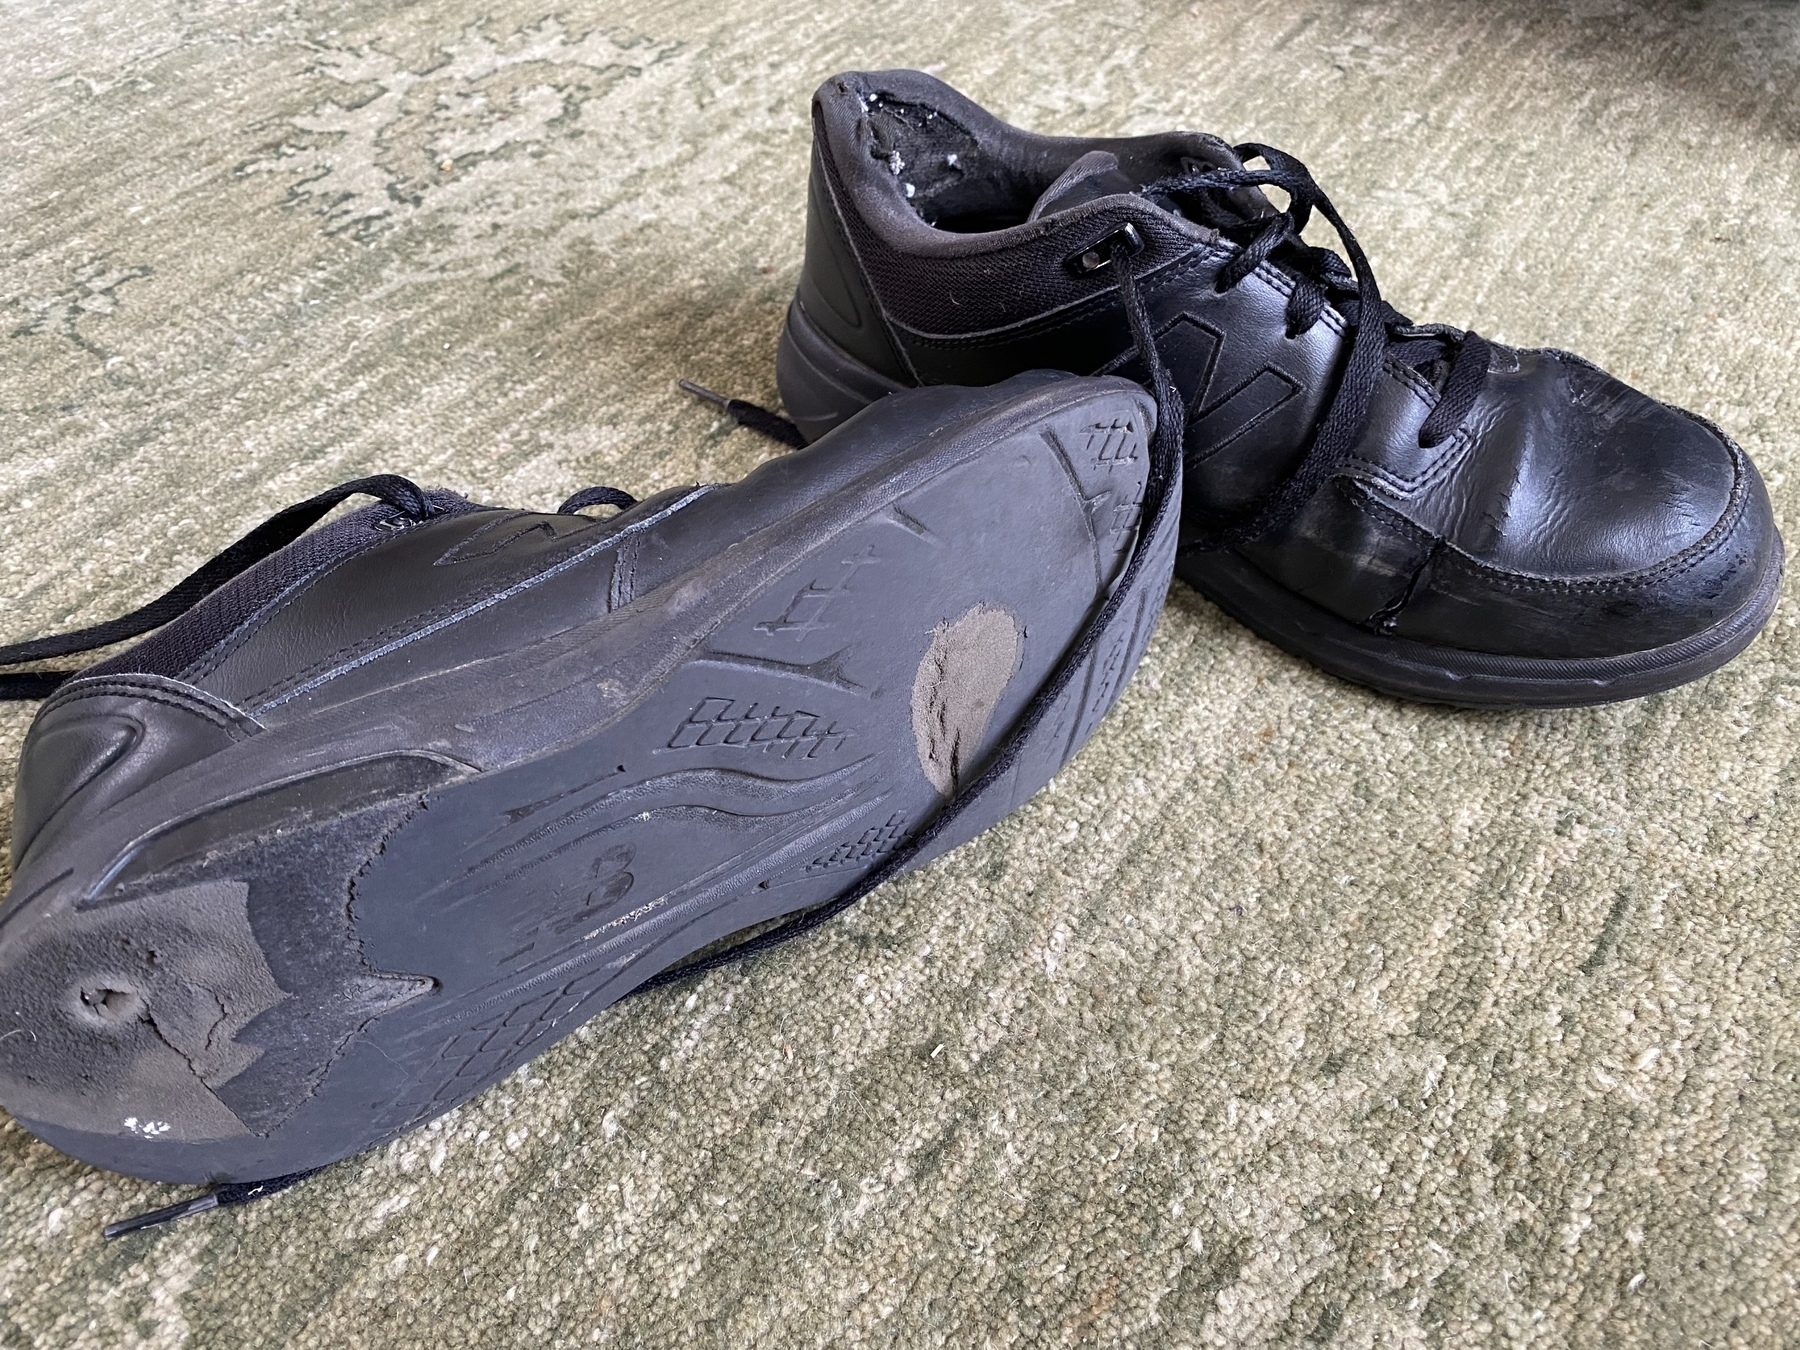 Close up of two worn black shoes.